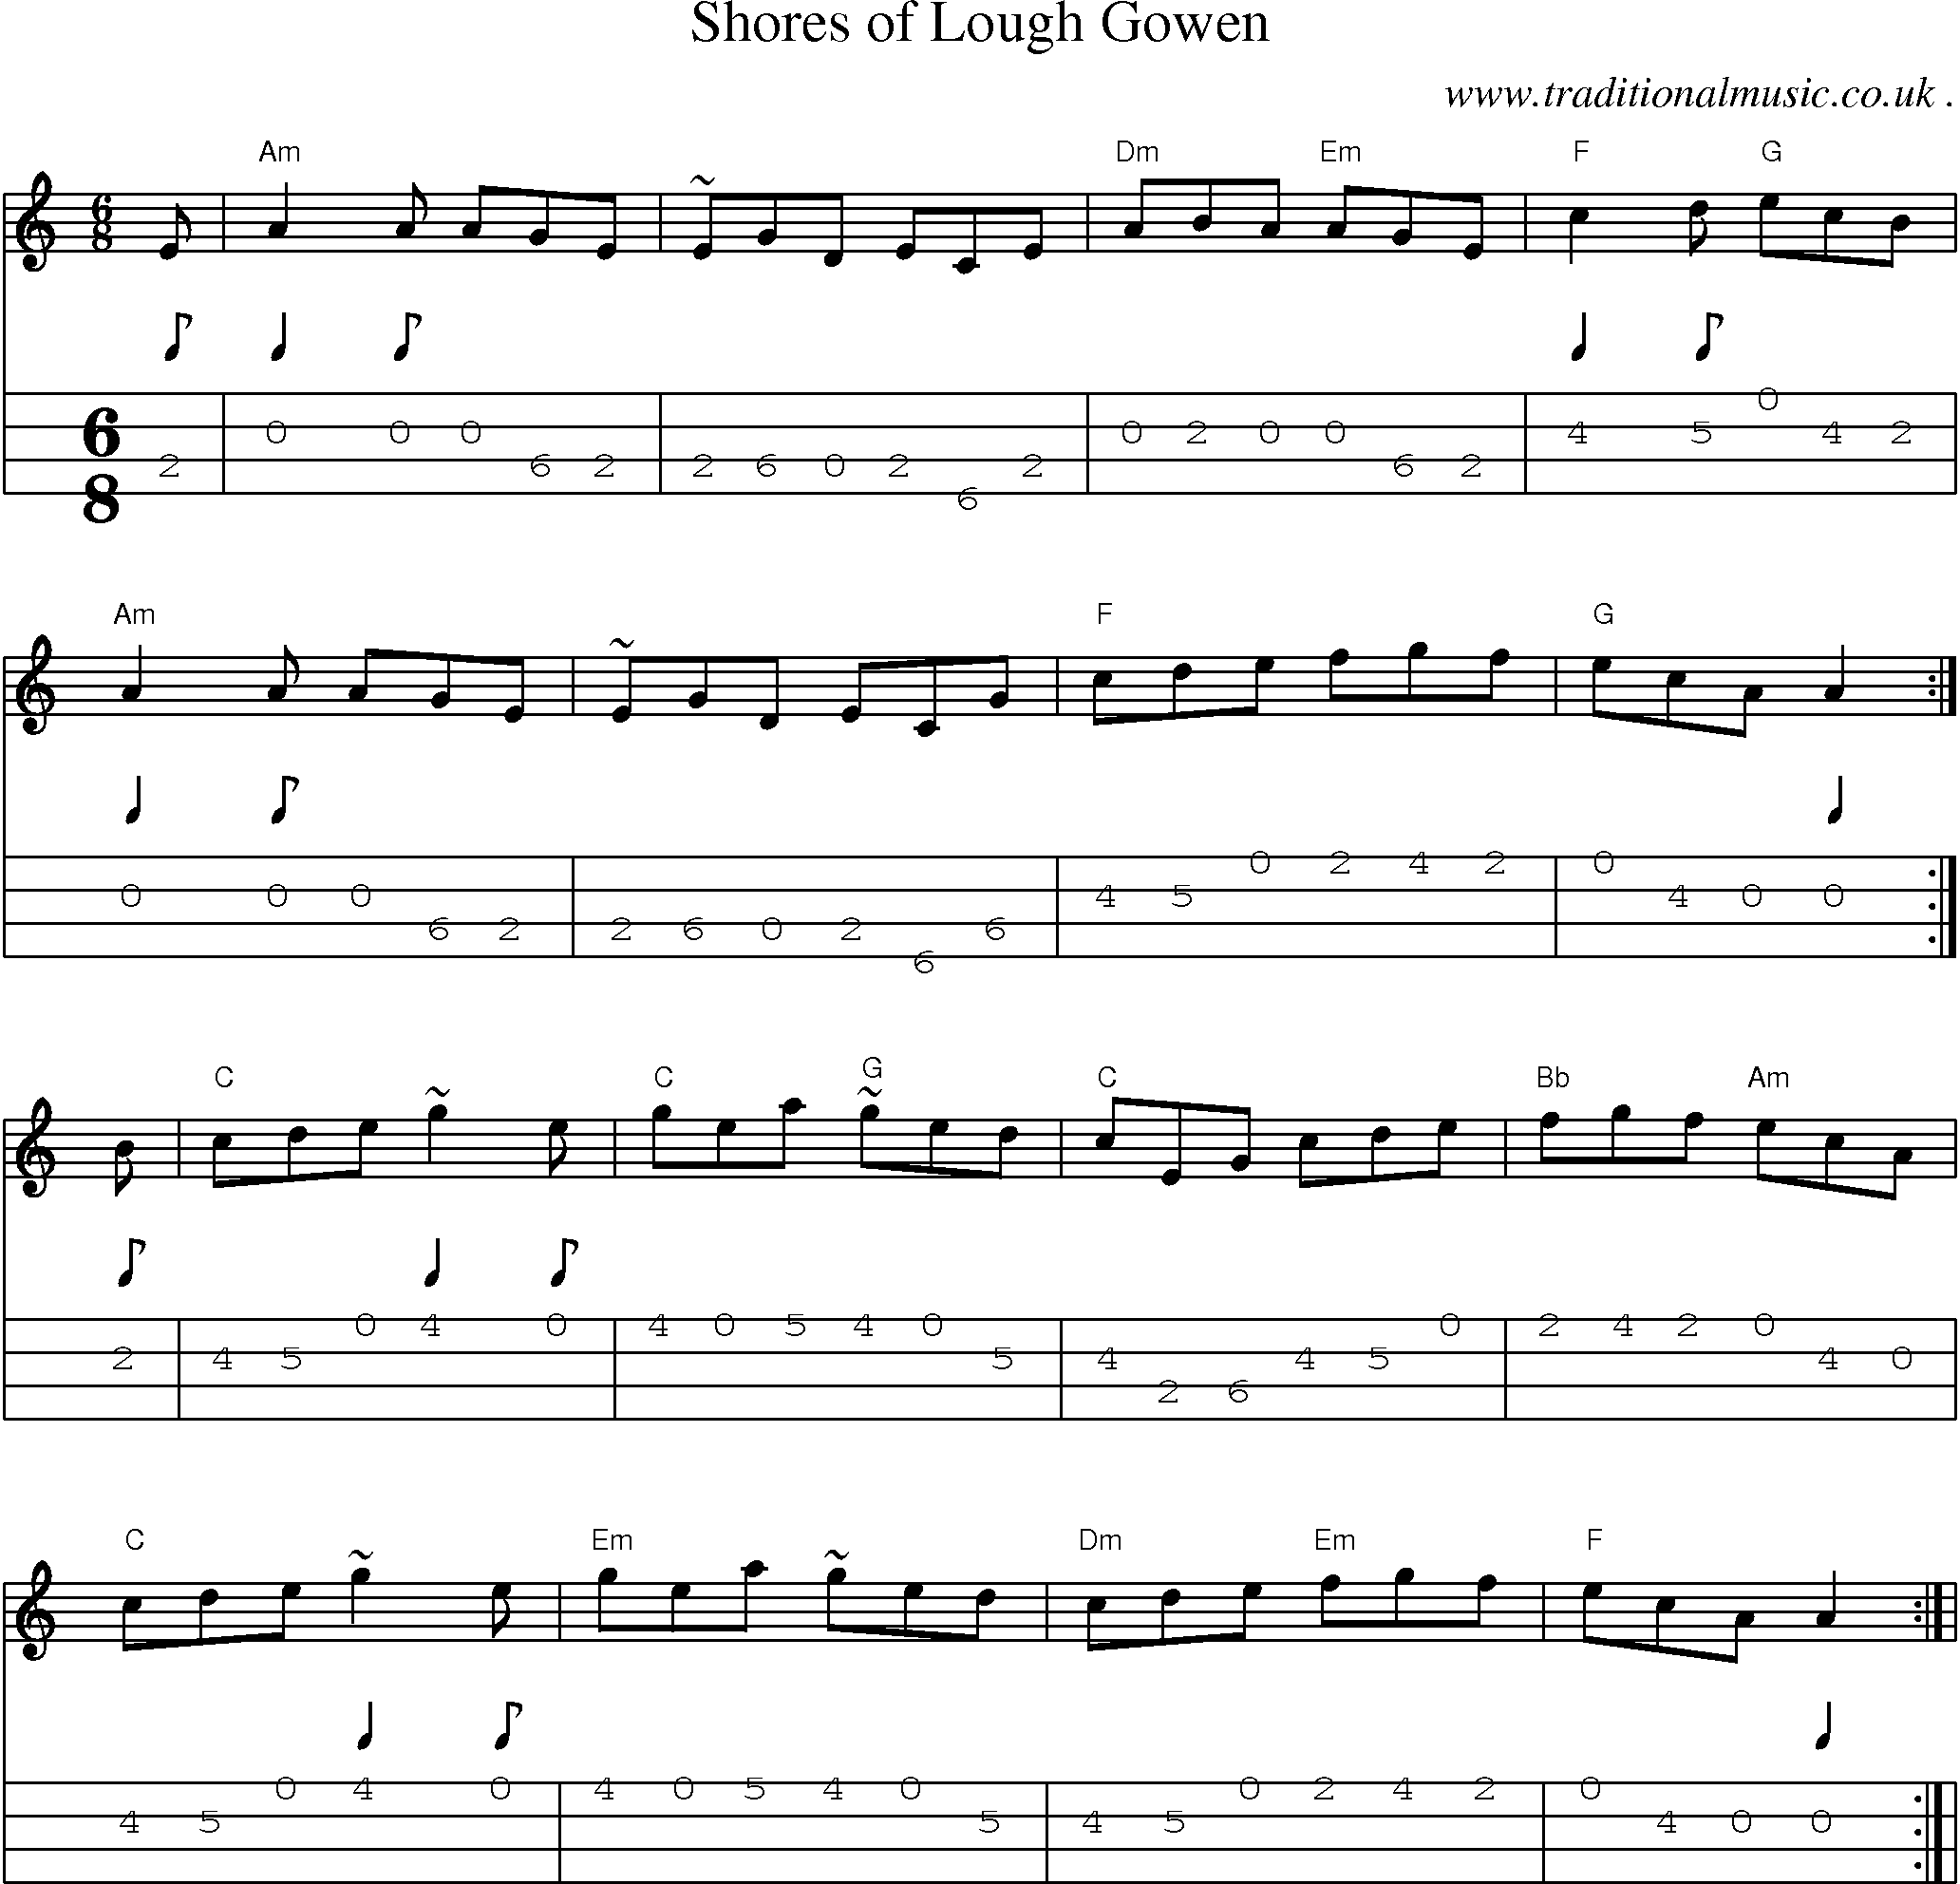 Music Score and Guitar Tabs for Shores Of Lough Gowen